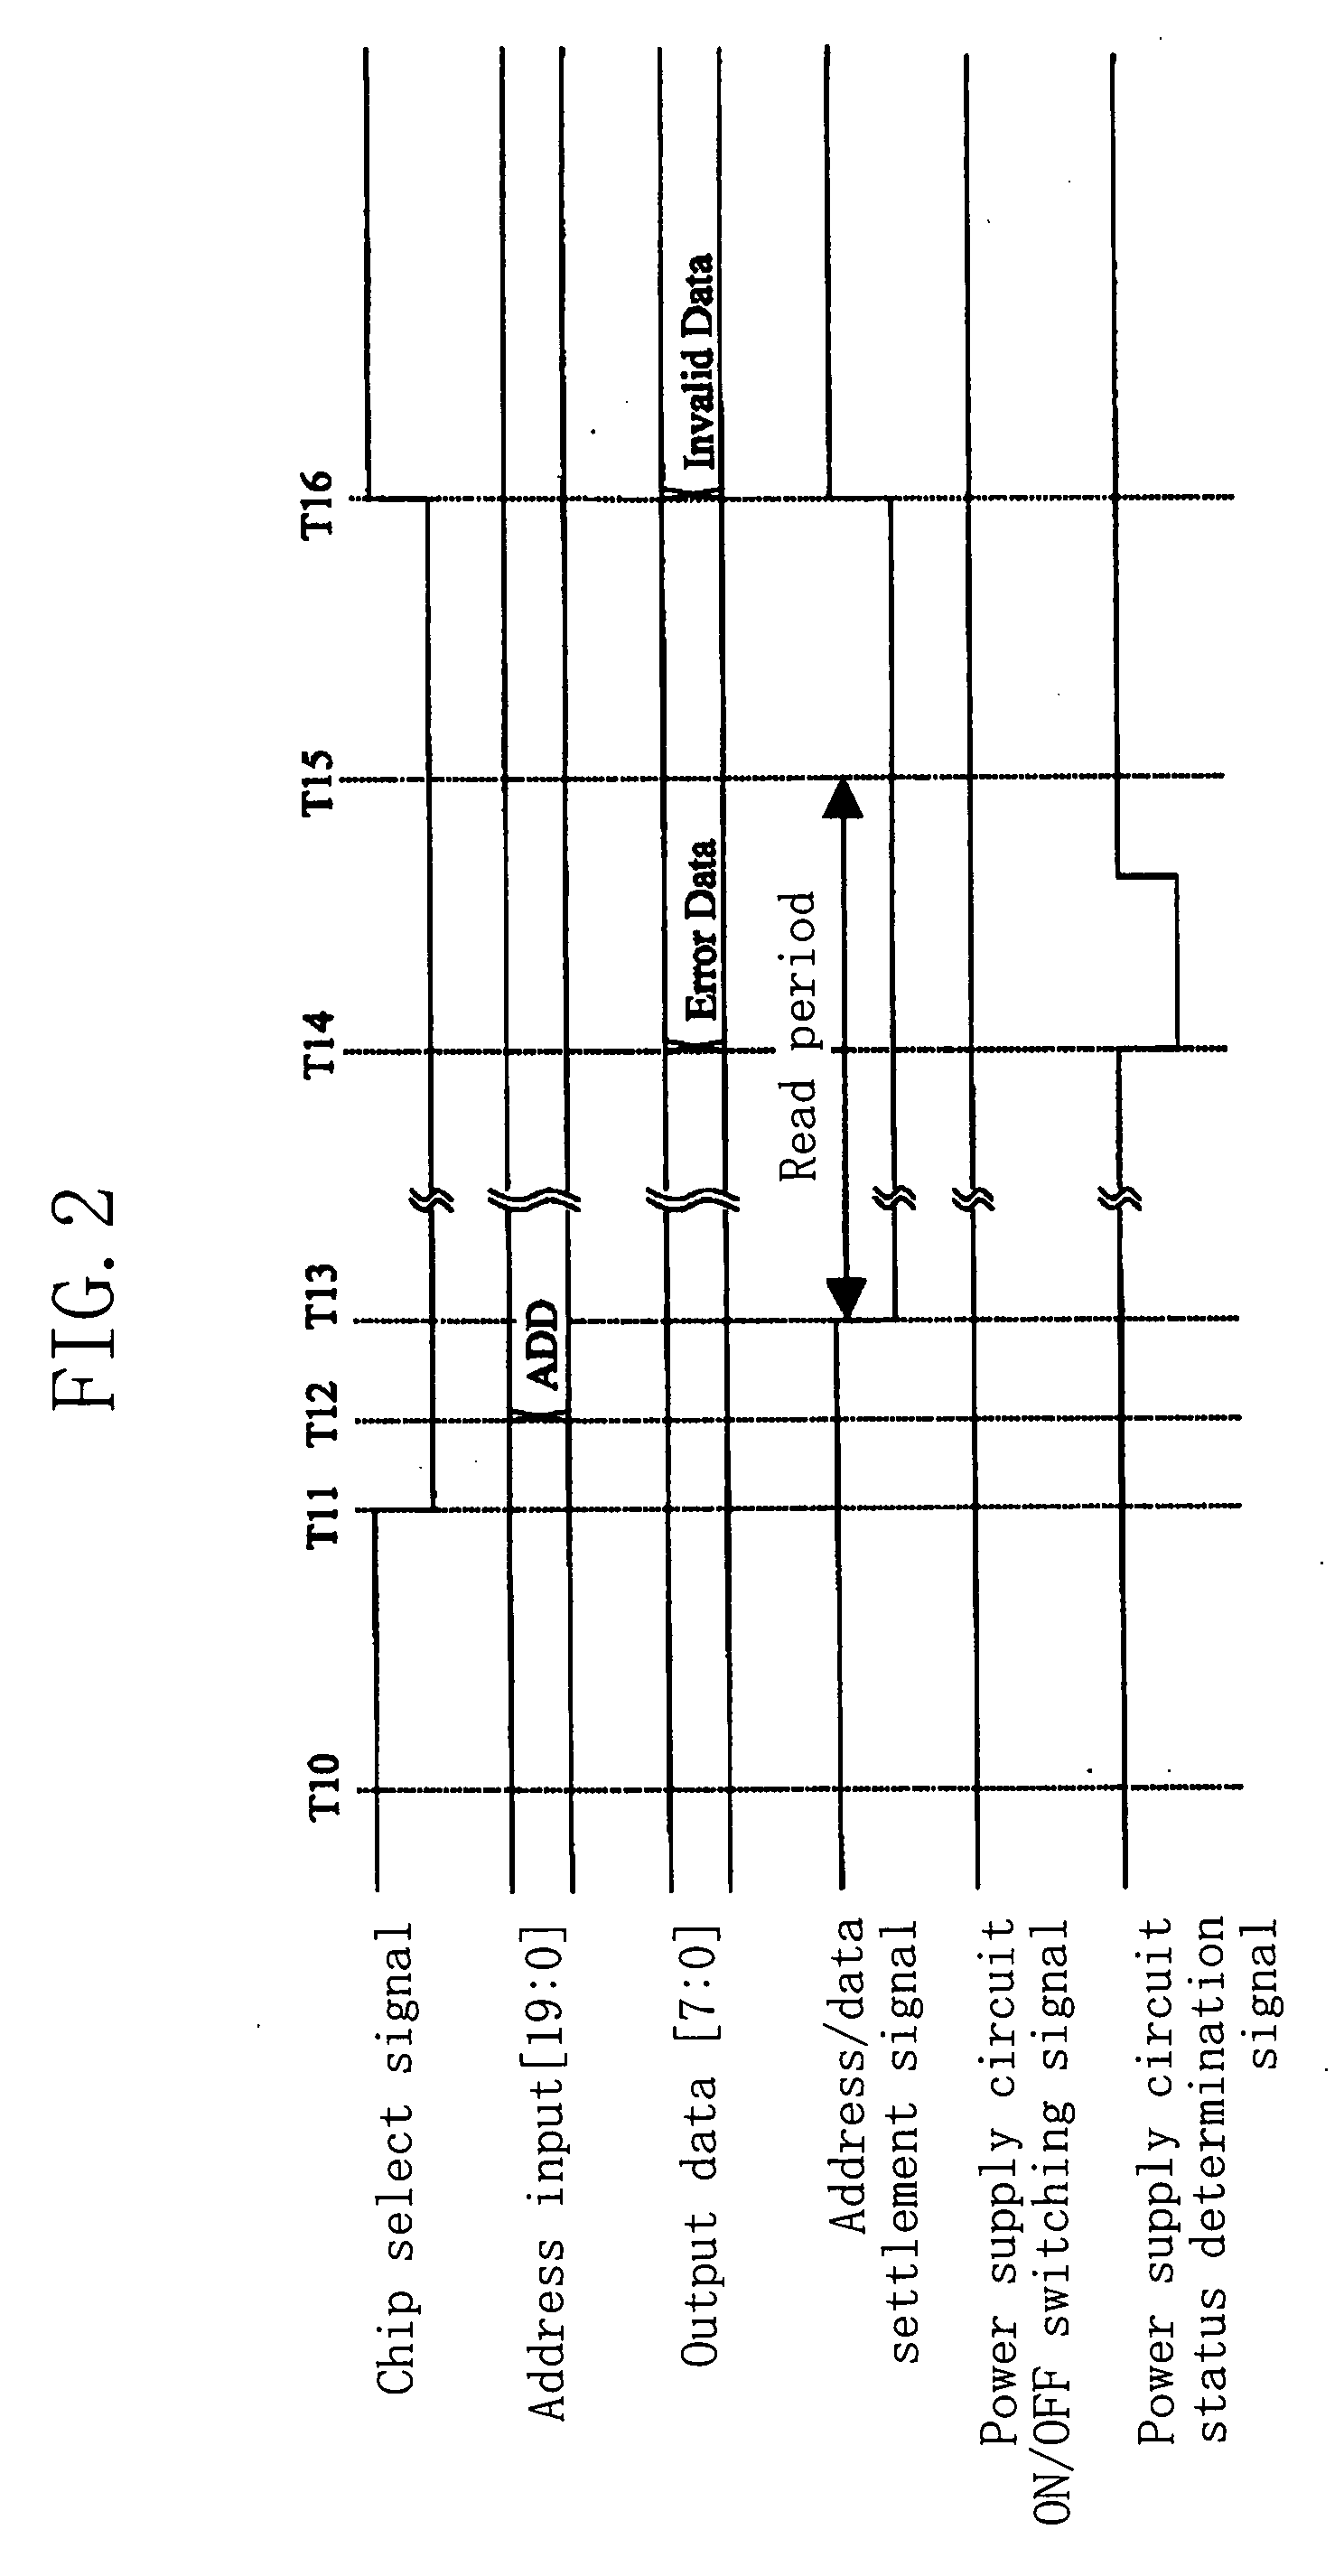 Semiconductor memory device, and data transmitting/receiving system